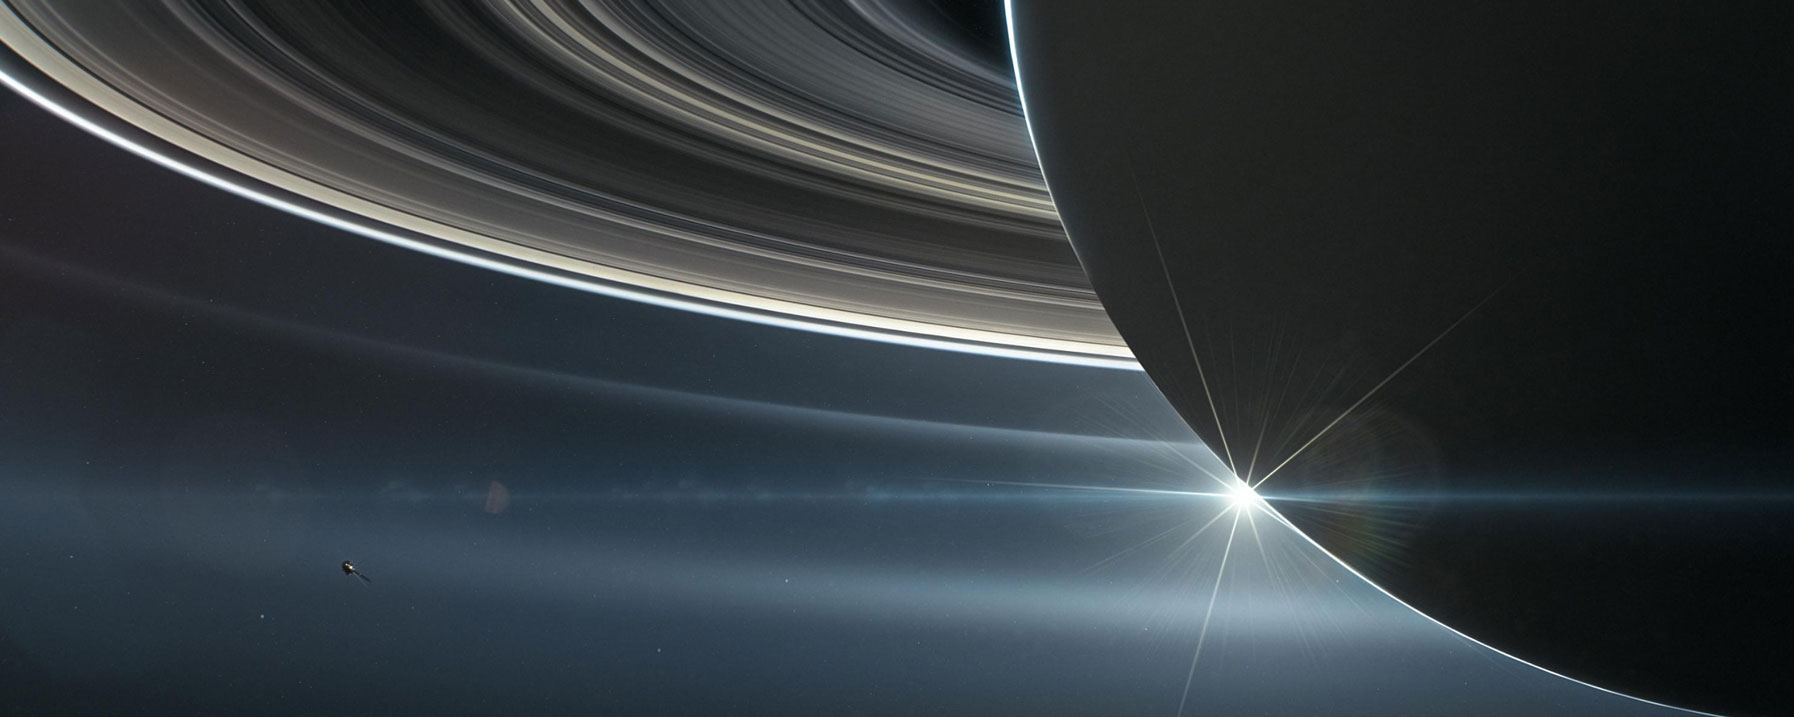 An illustration of NASA’s Cassini spacecraft in orbit around Saturn, where it documented the ringed planet in 2017.